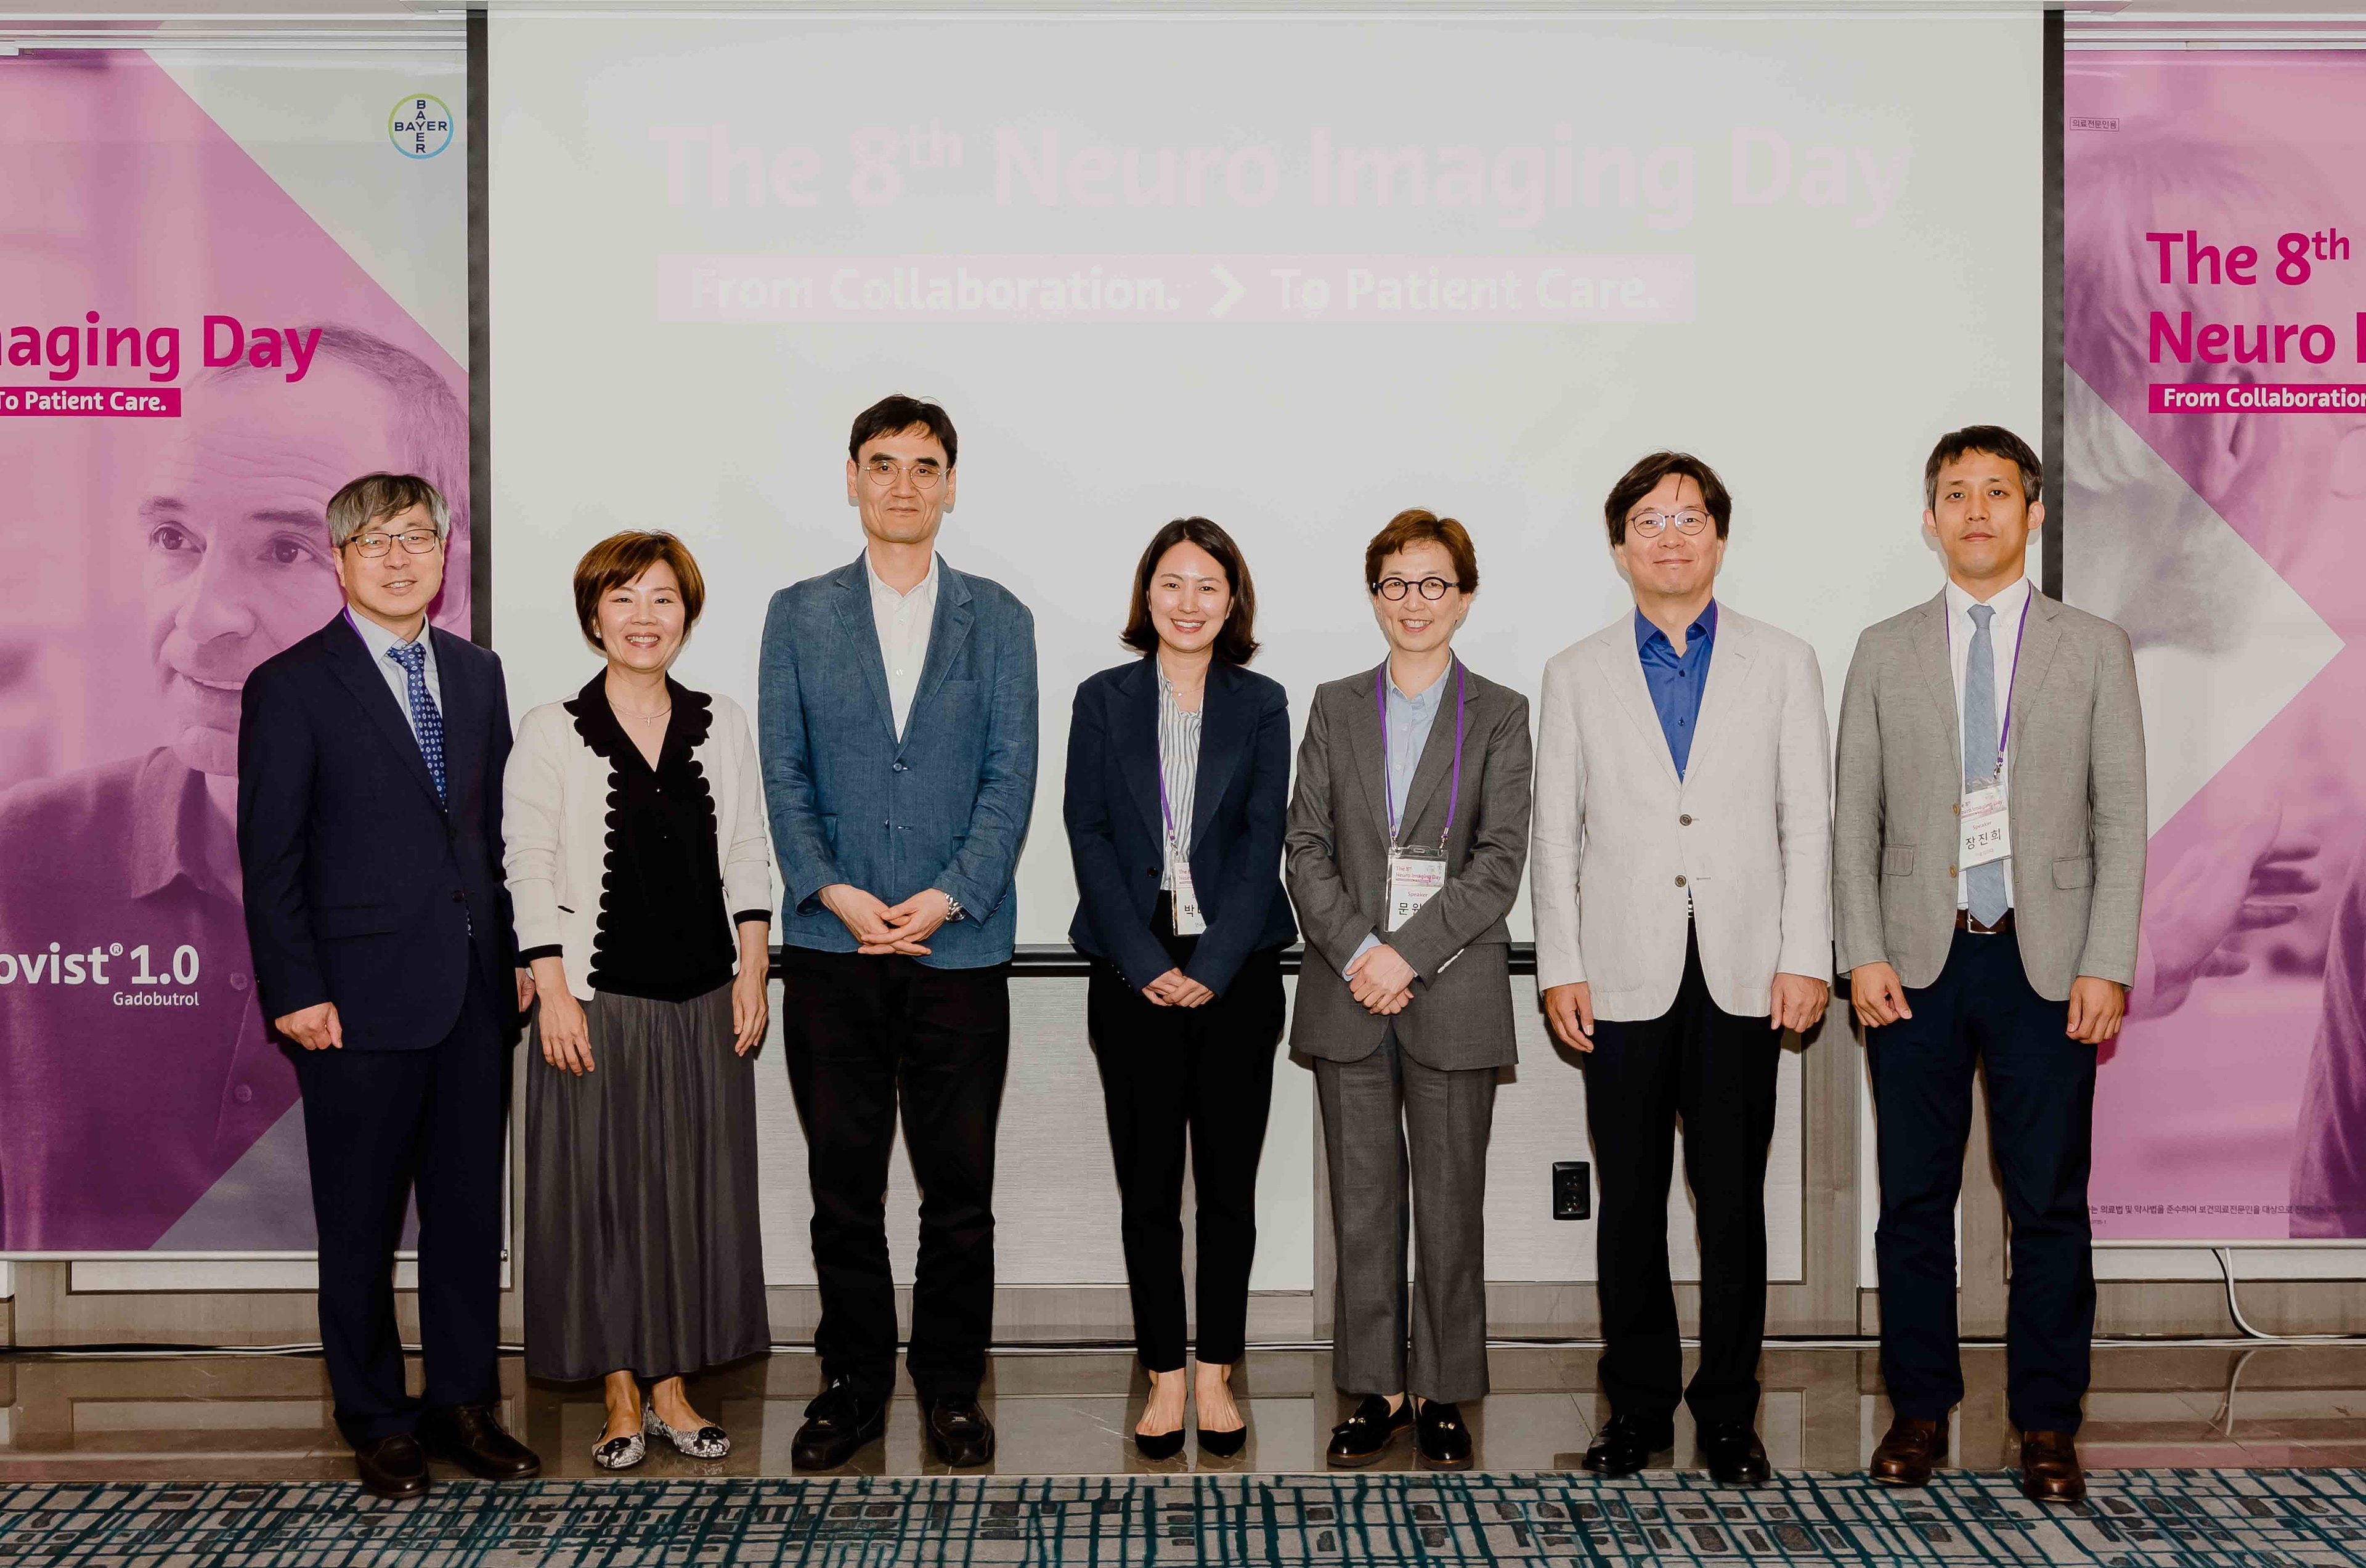 Neuro imaging day 2019 preview image